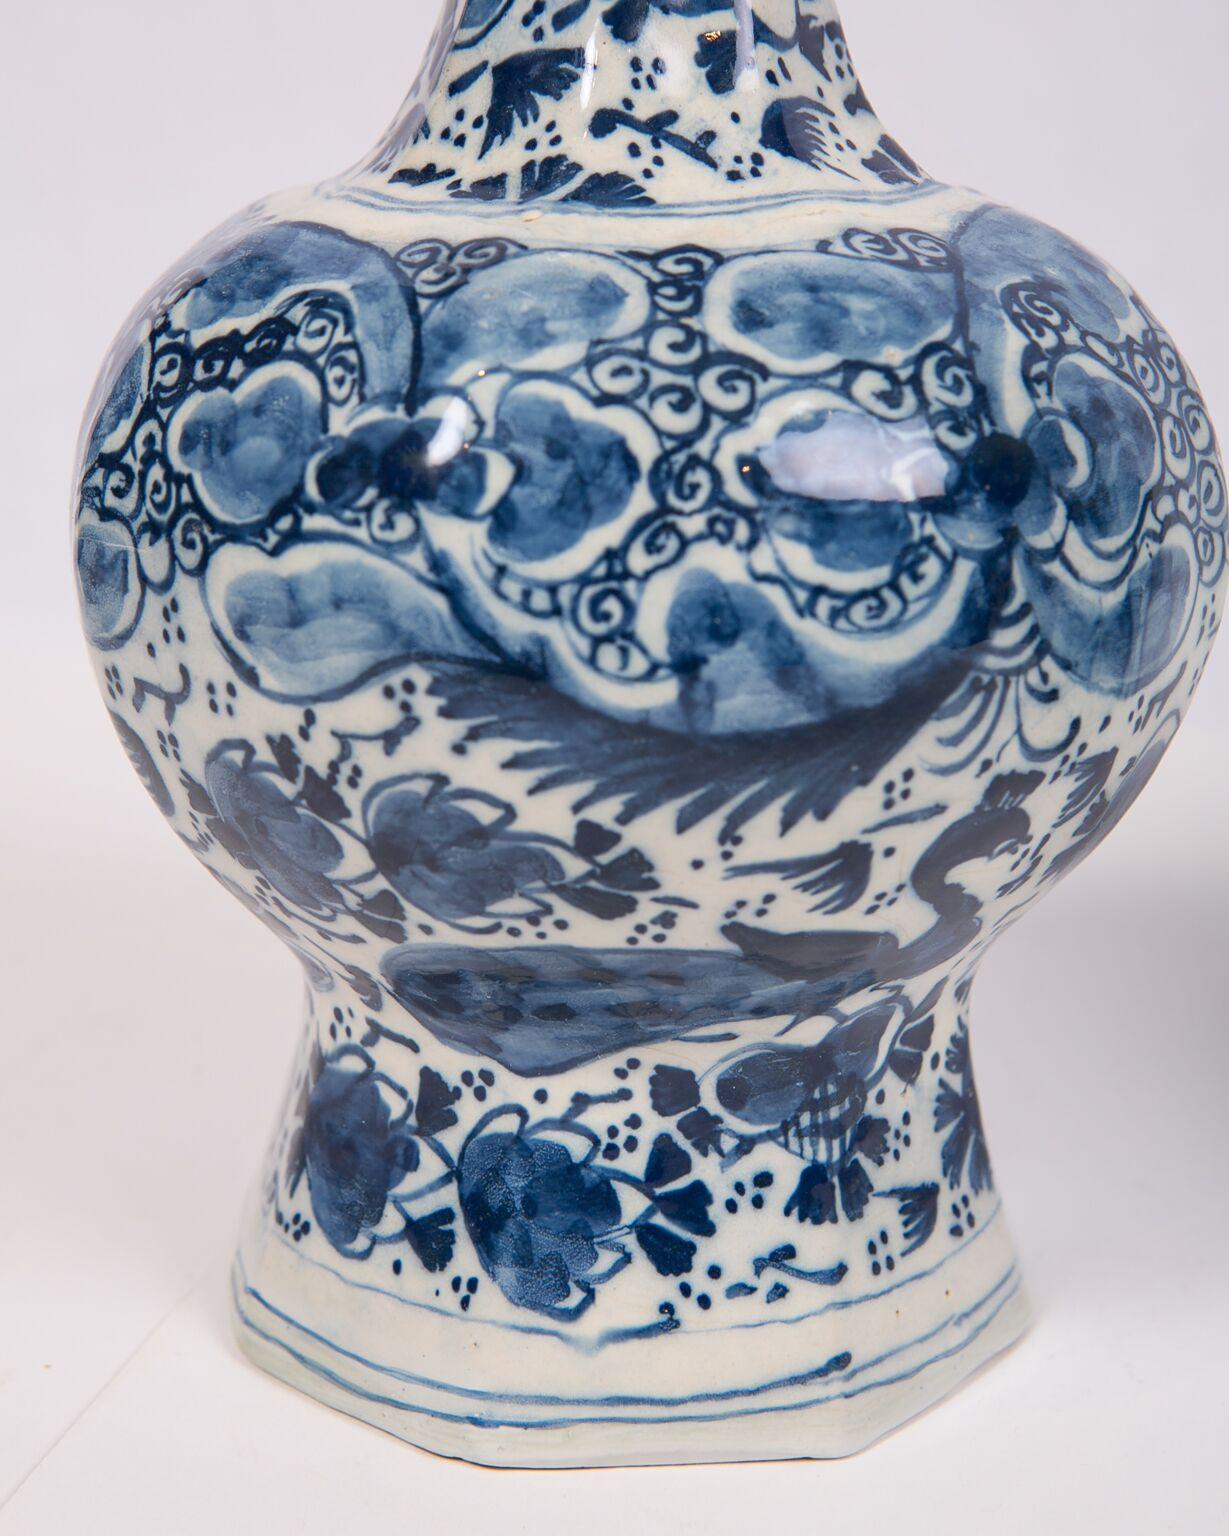 Rococo Pair of Blue and White Delft Vases Showing Peacocks and Flowers, 18th Century